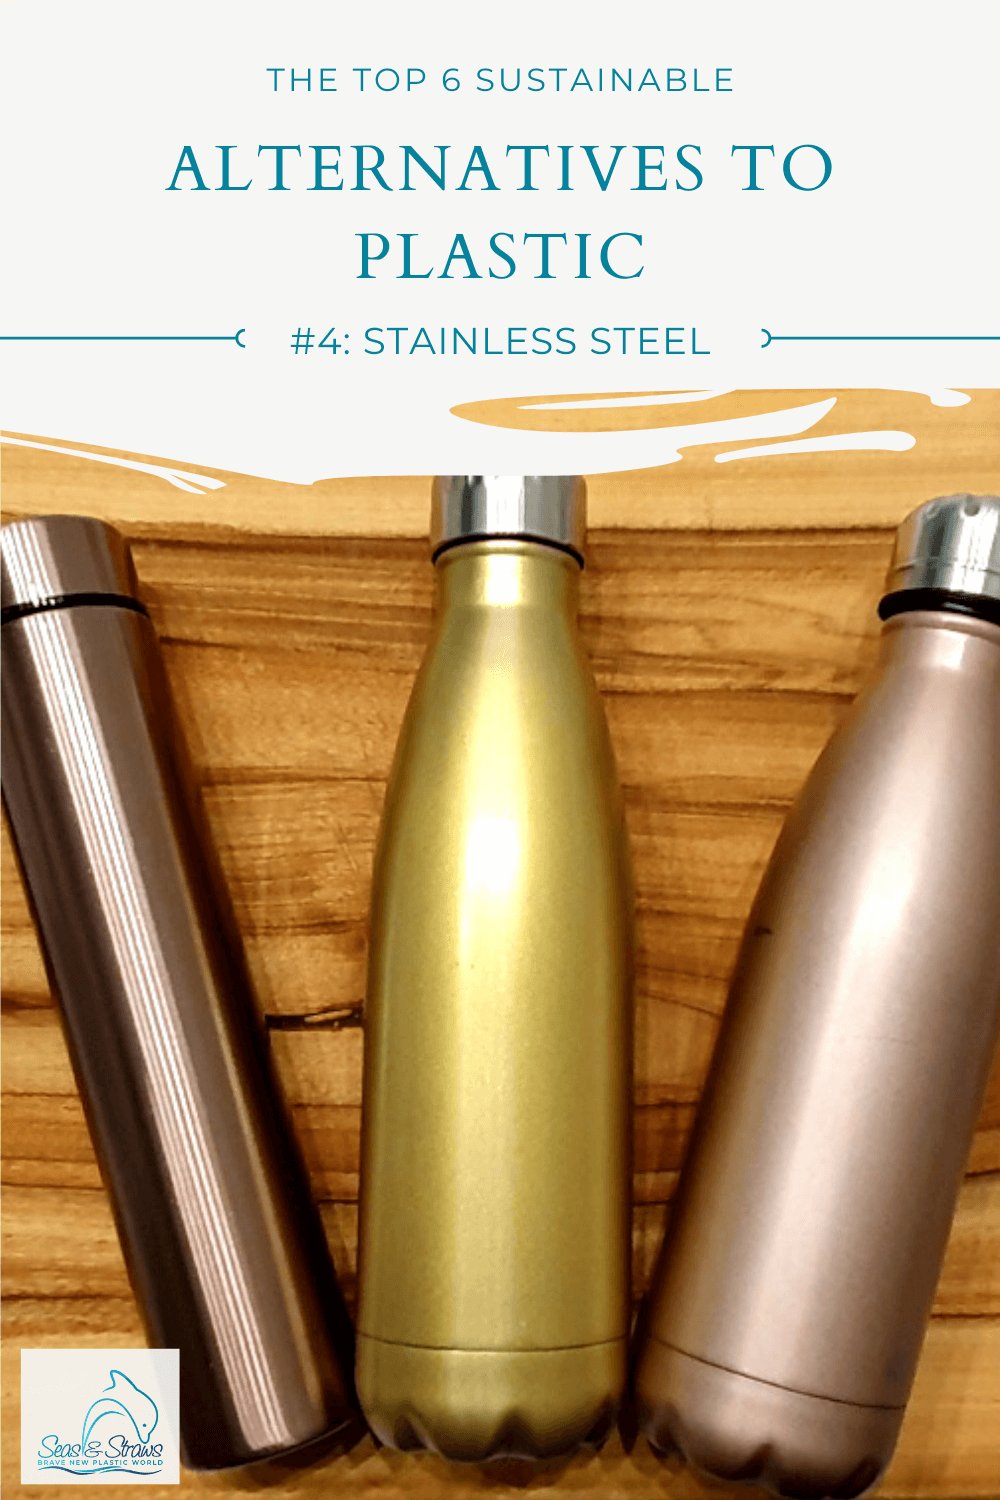 Learn why stainless steel products are a zero waste, hygienic and safe alternative to our everyday plastic household items.